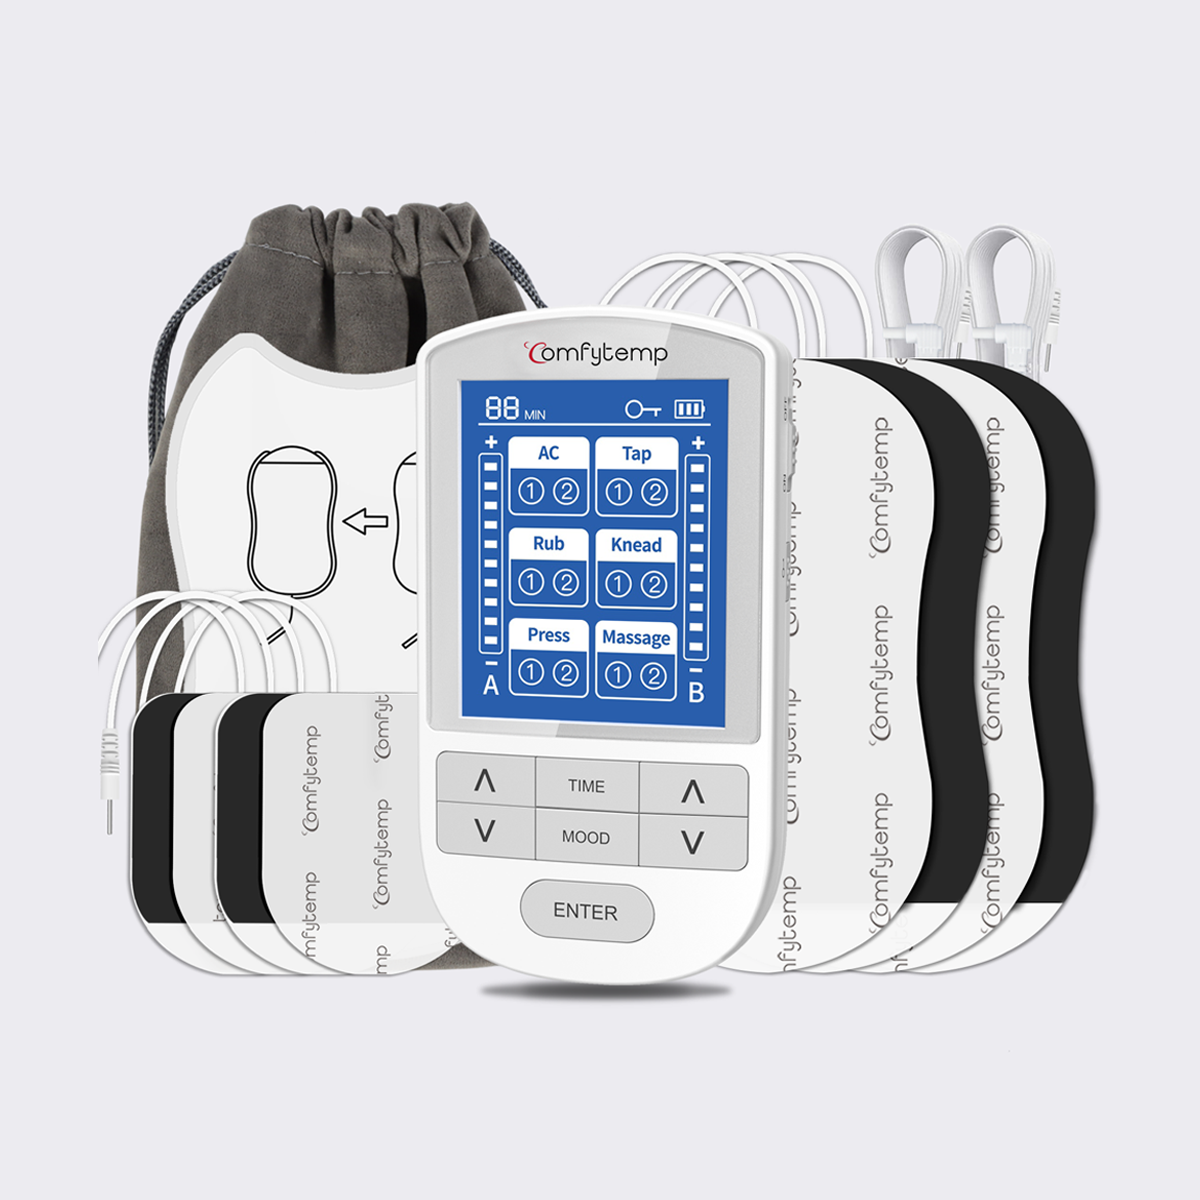 Comfier Tens Unit Muscle Stimulator with 2 Channels, Electric Pulse Ba